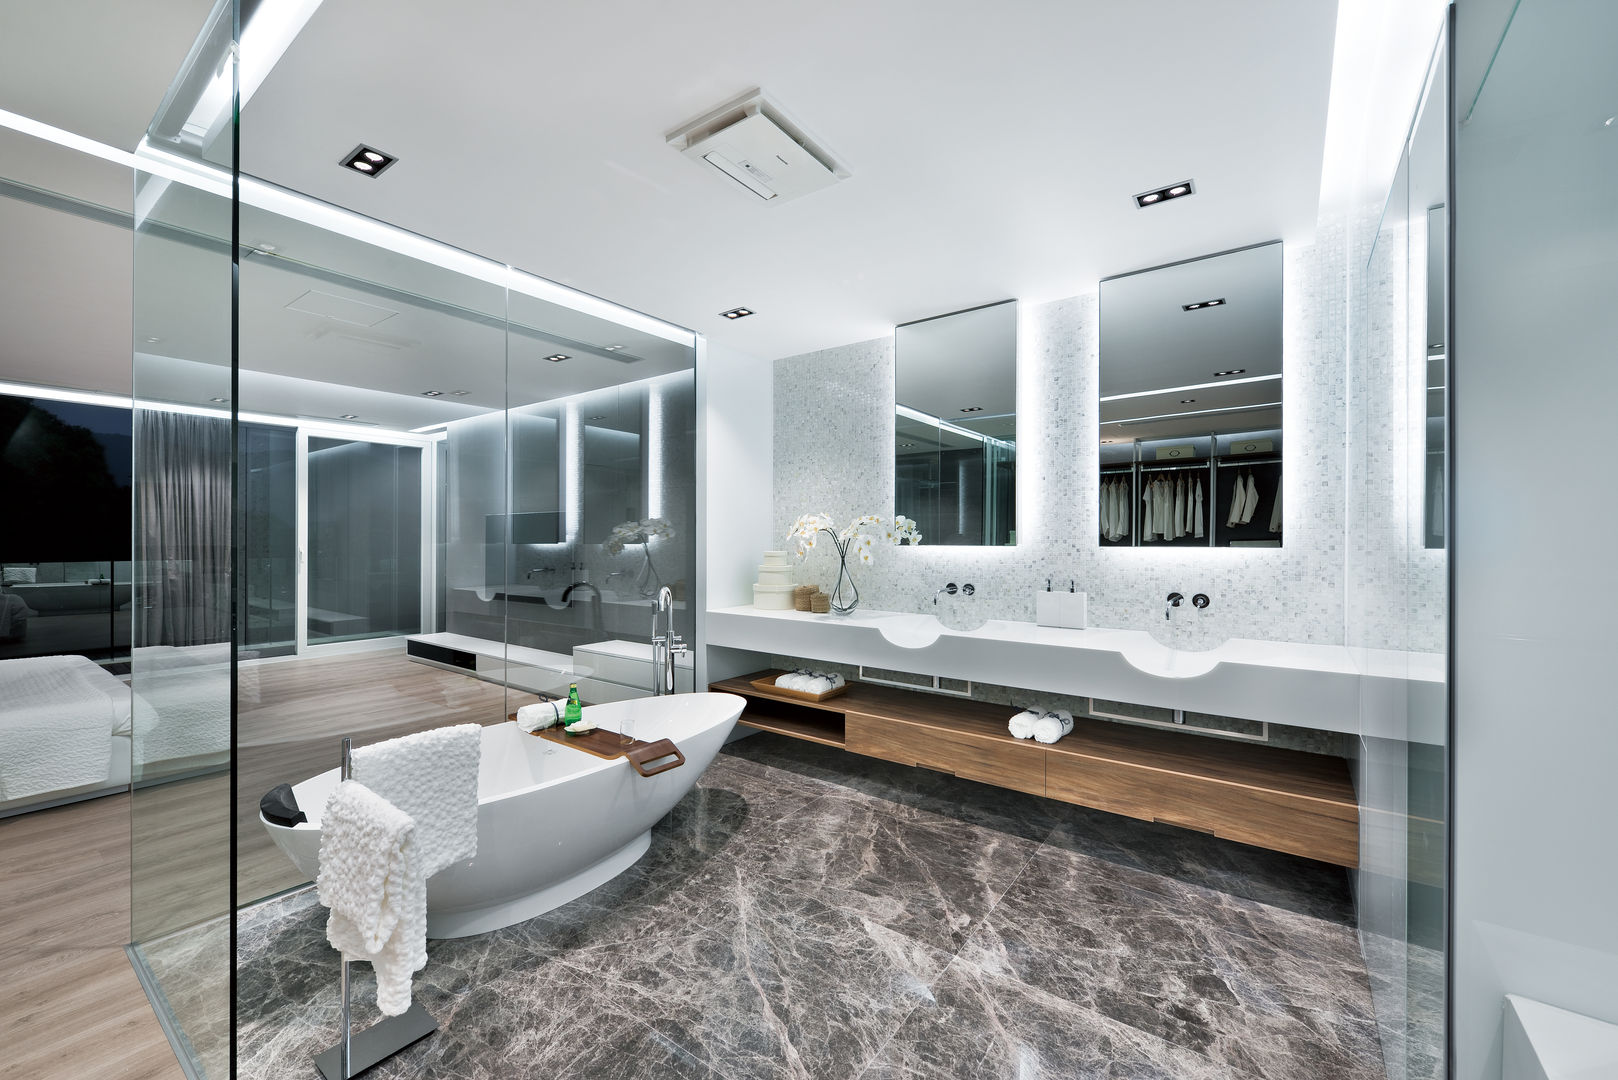 Magazine editorial - House in Sai Kung by Millimeter, Millimeter Interior Design Limited Millimeter Interior Design Limited Modern style bathrooms